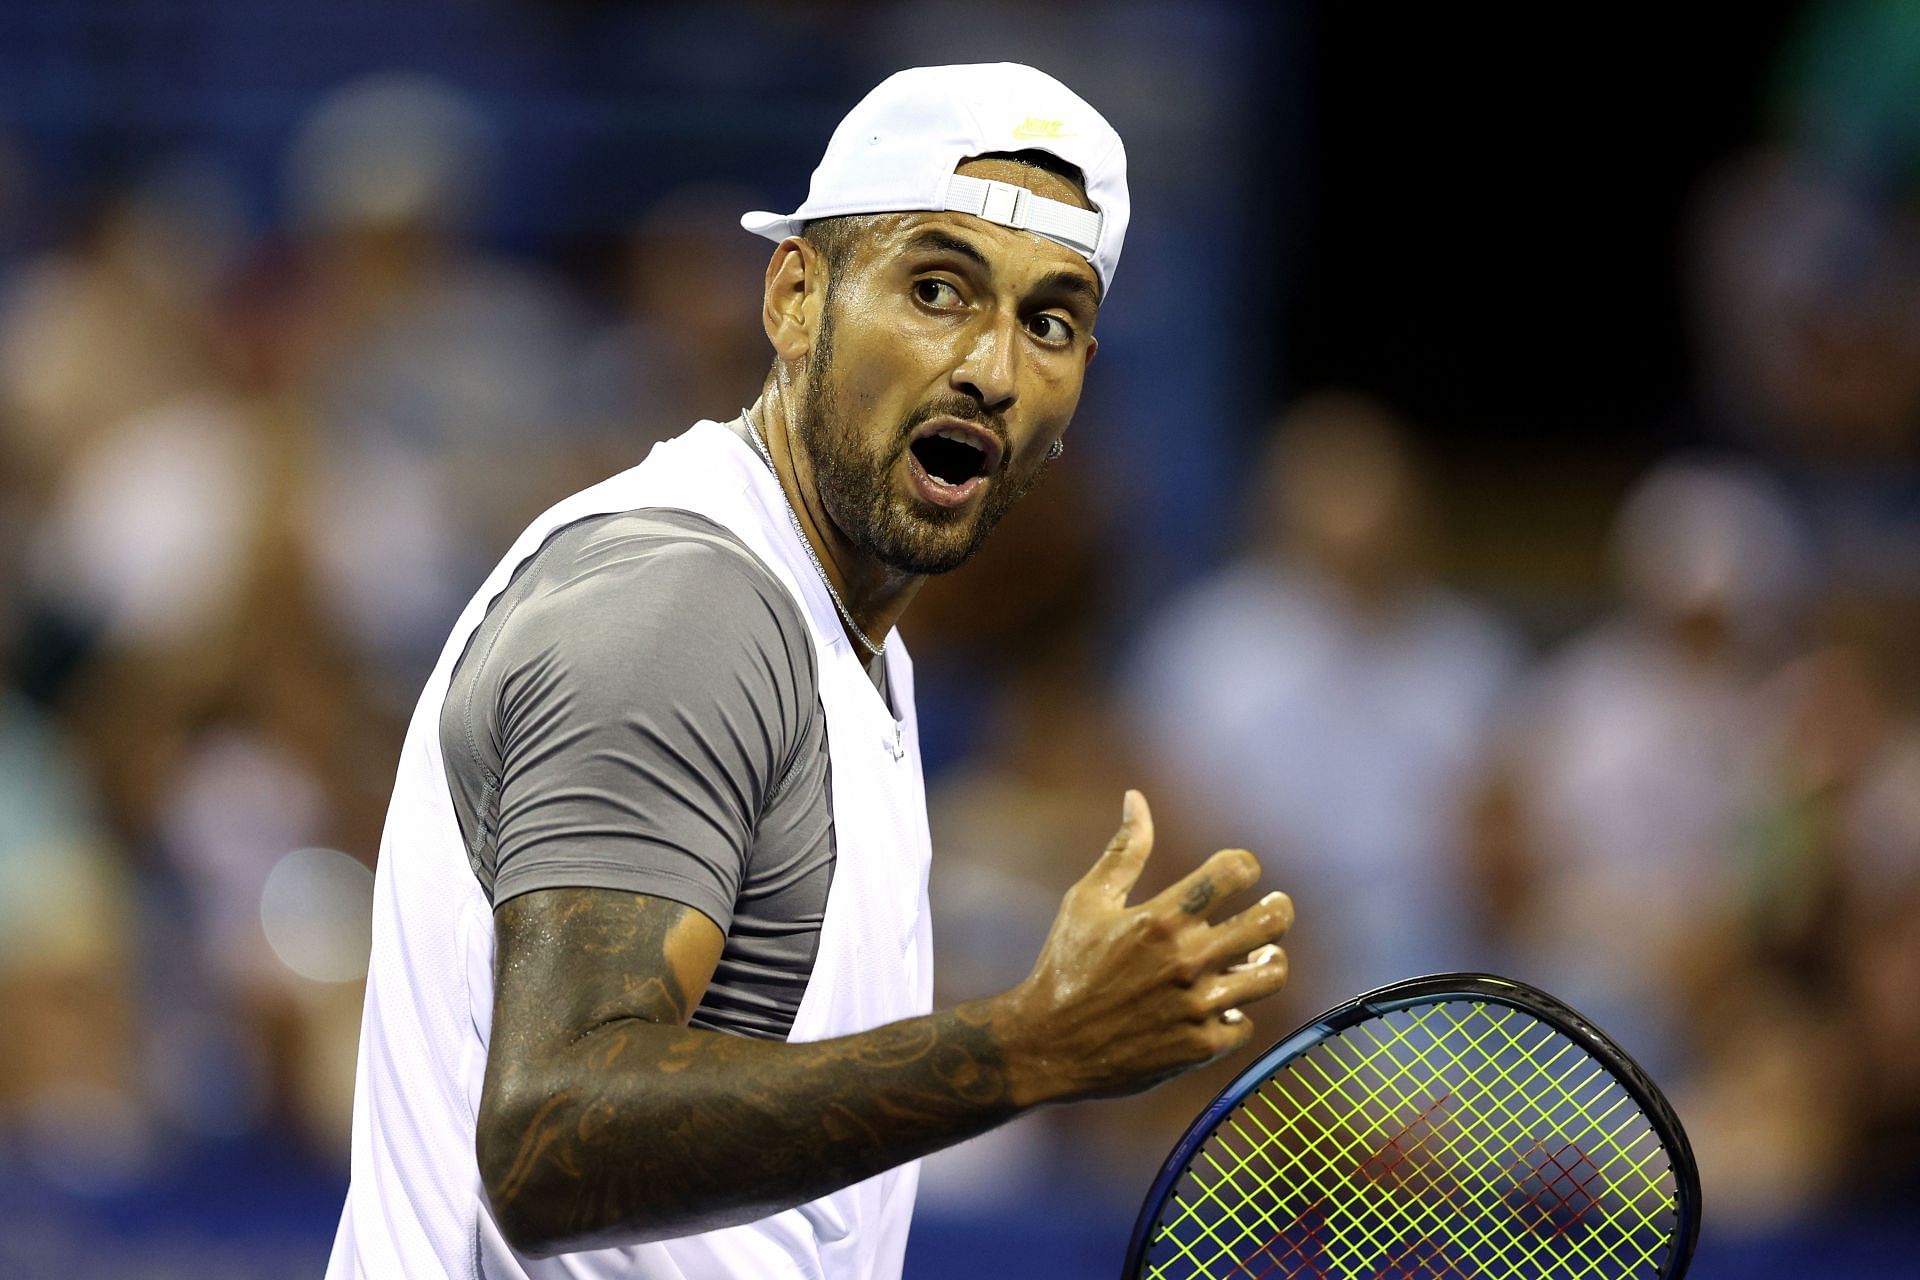 Nick Kyrgios will aim for his first Masters 1000 title